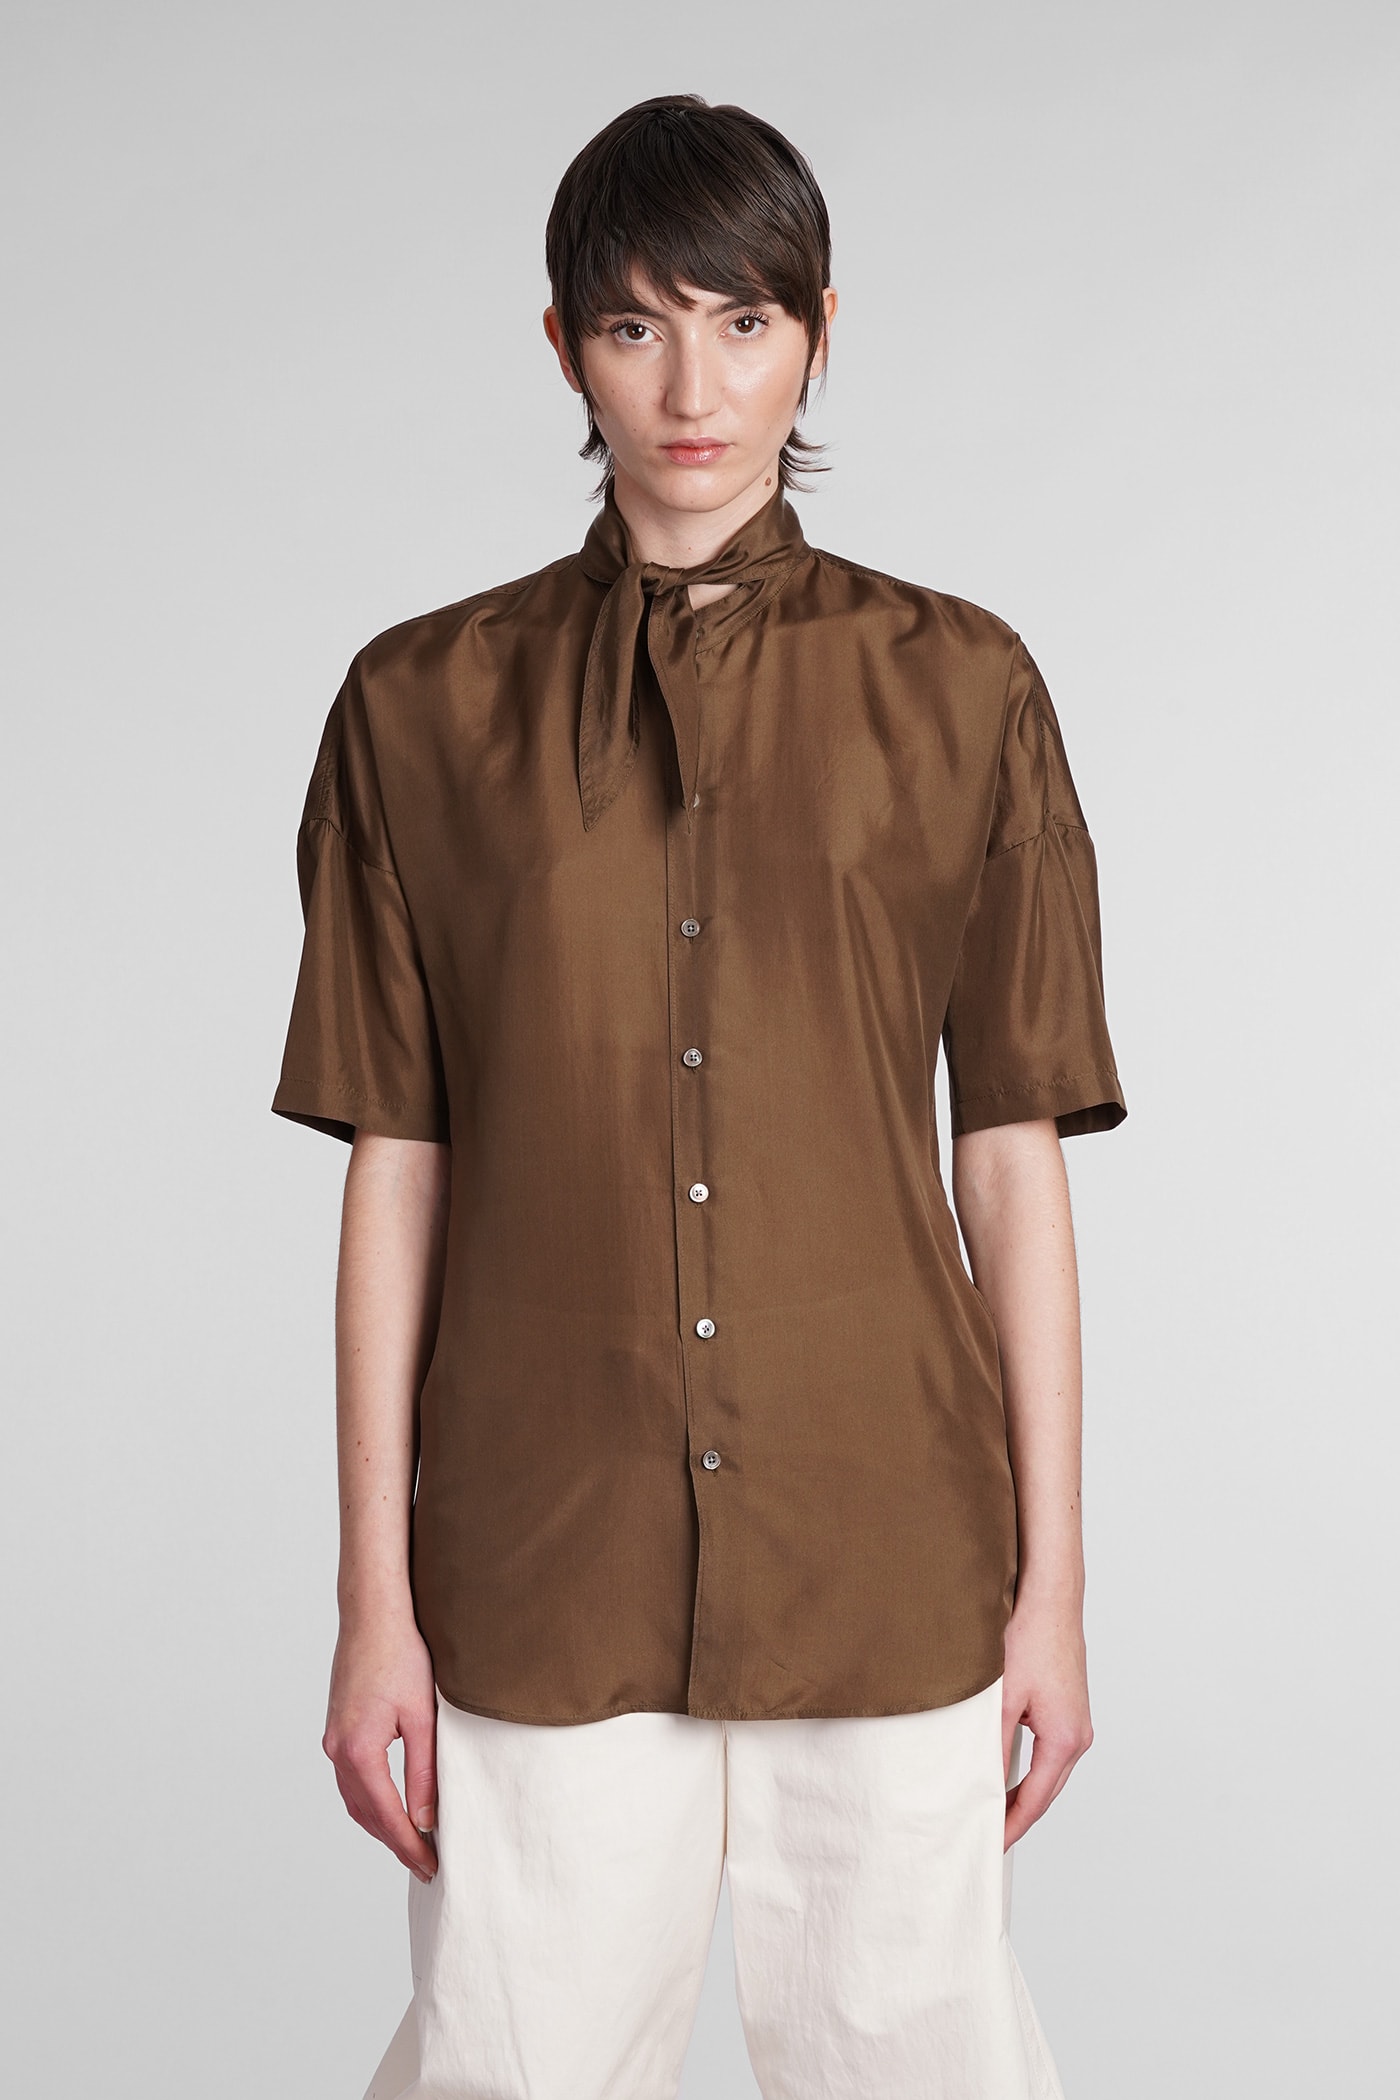 LEMAIRE SHIRT IN BROWN SILK